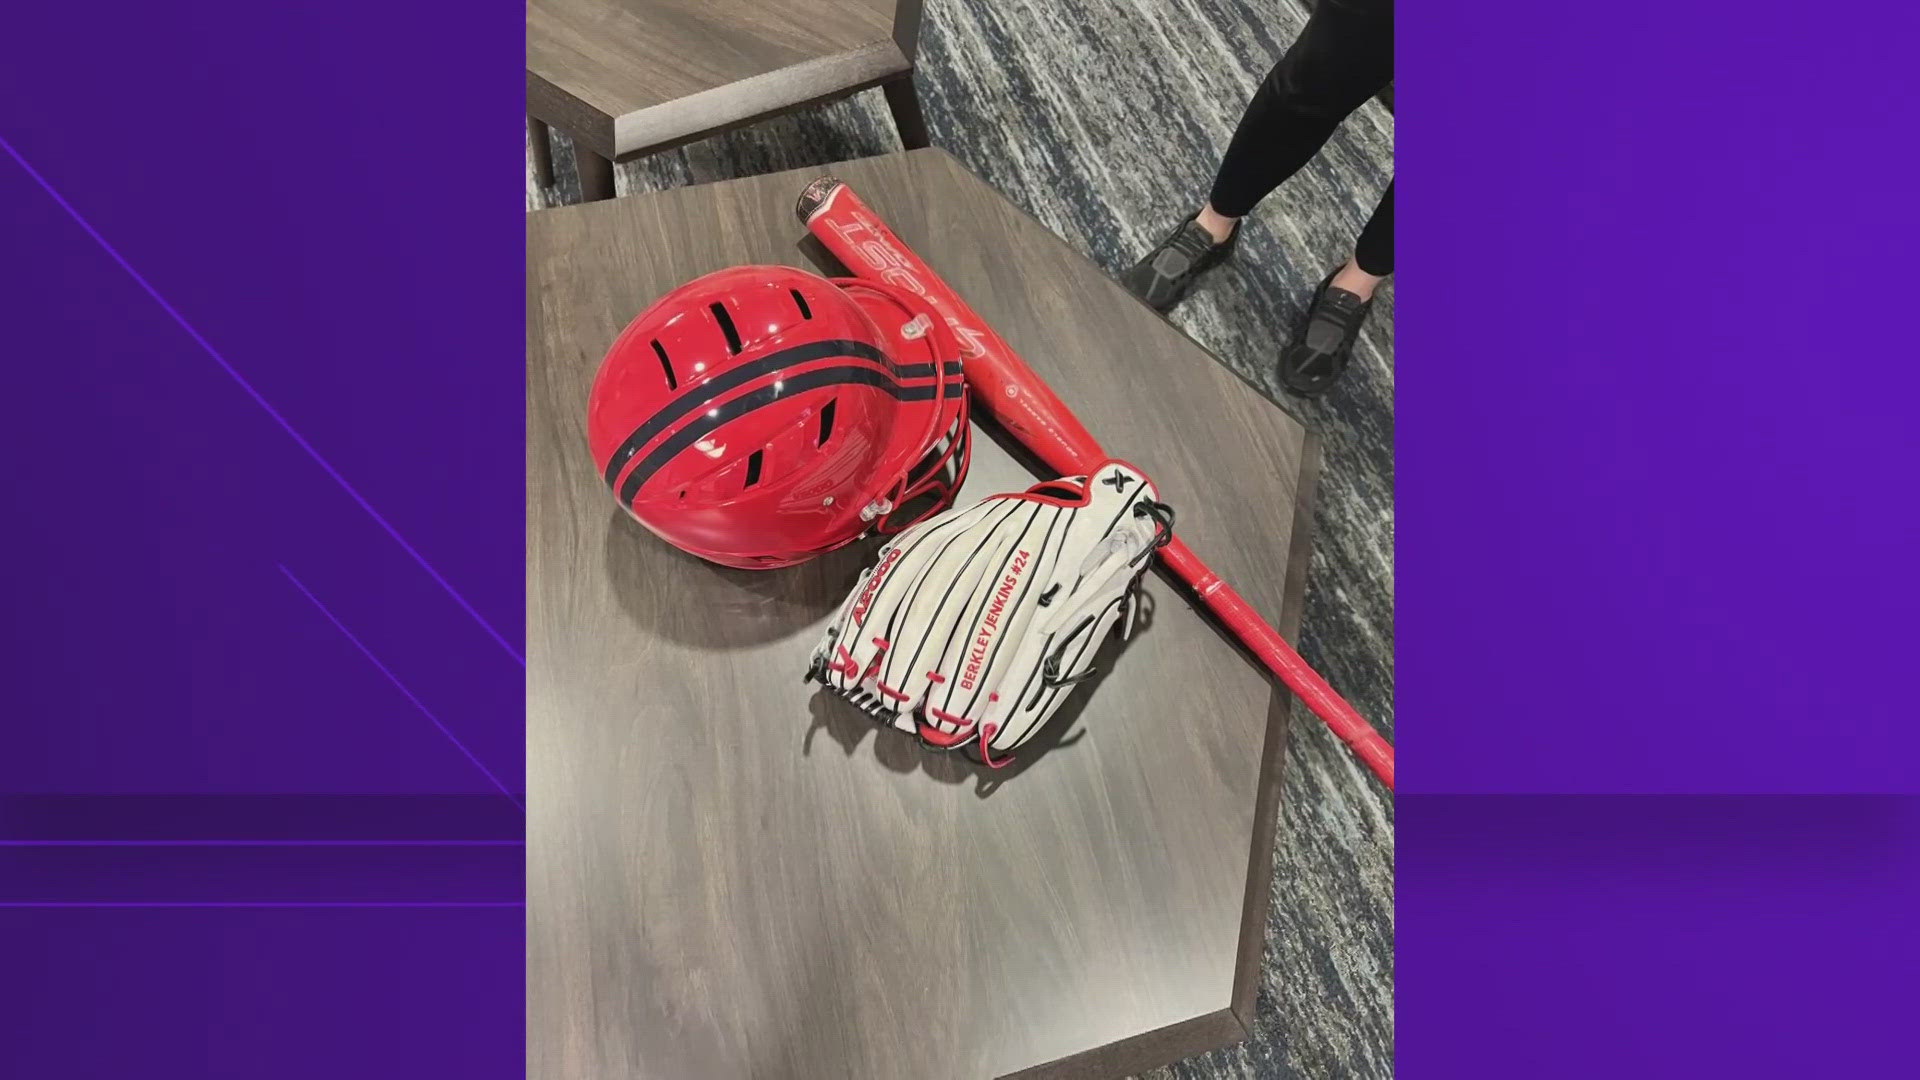 The Keller ISD softball team has recovered some items after the incident and will play tonight at Legacy High School at 8 p.m.